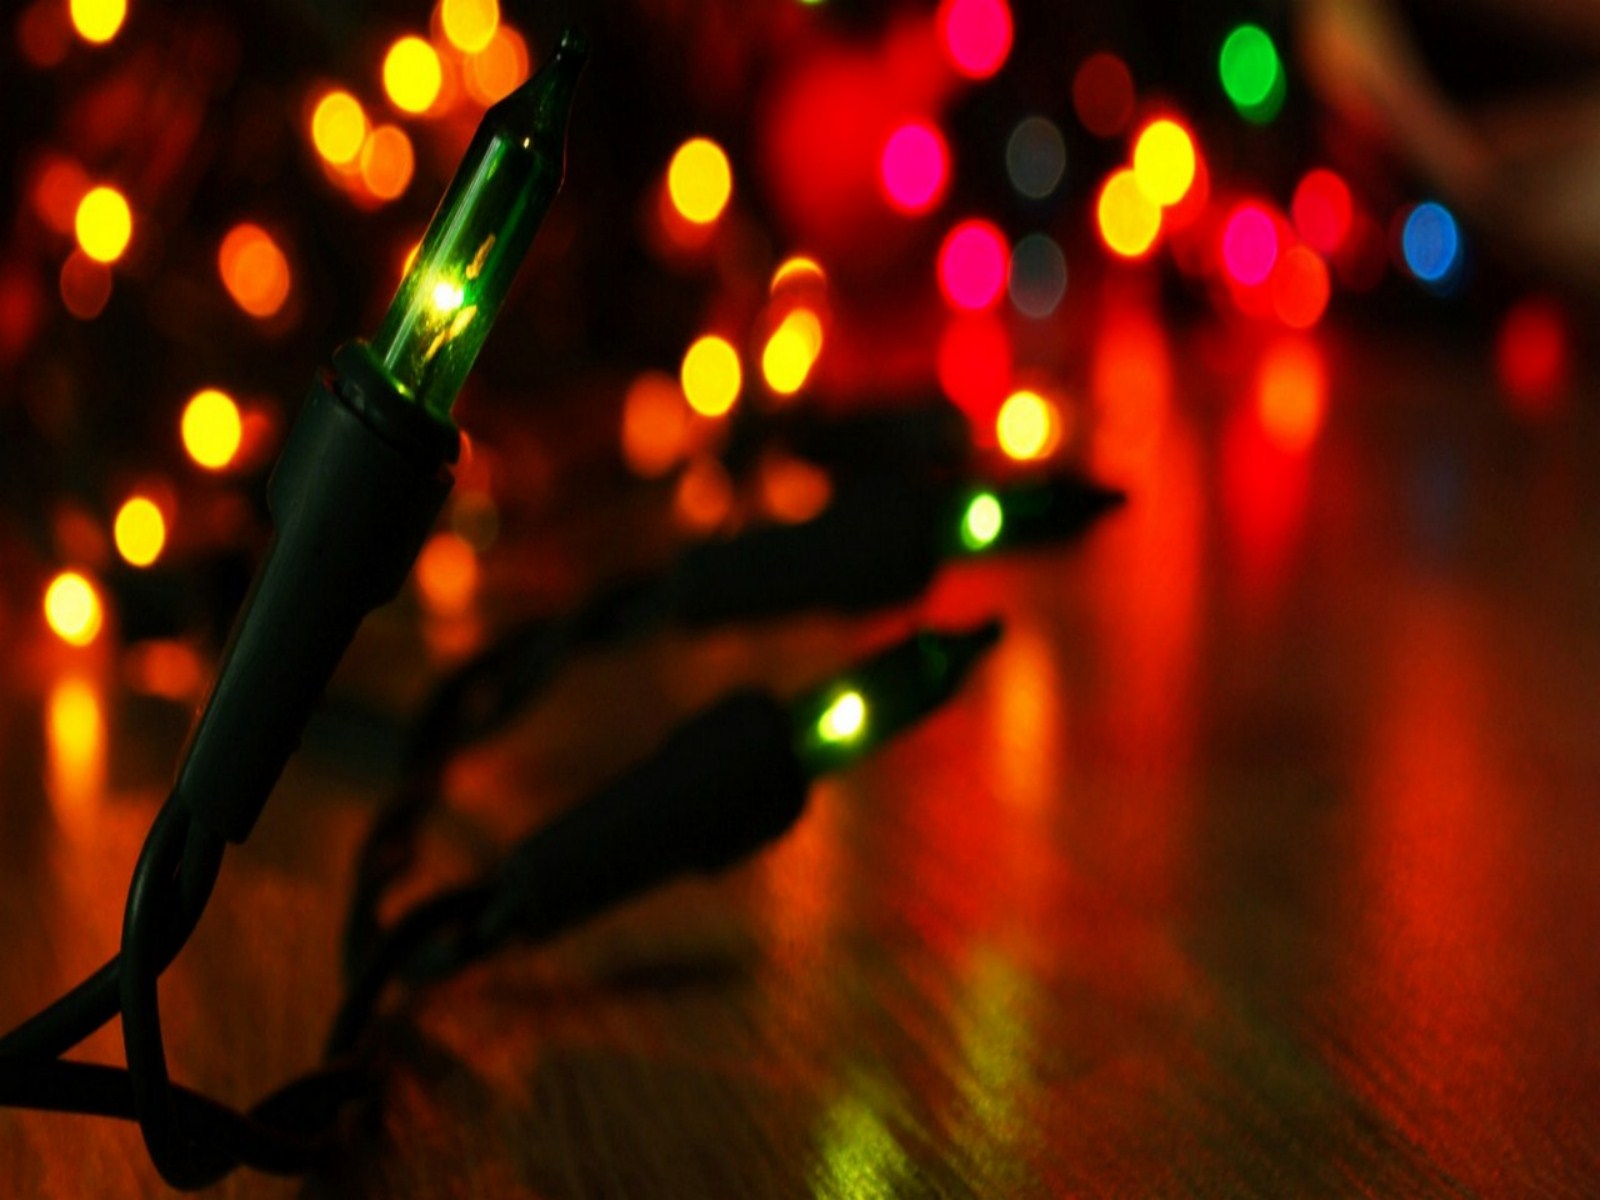 Christmas Lights Iphone Wallpaper Hd Images Pictures   Becuo